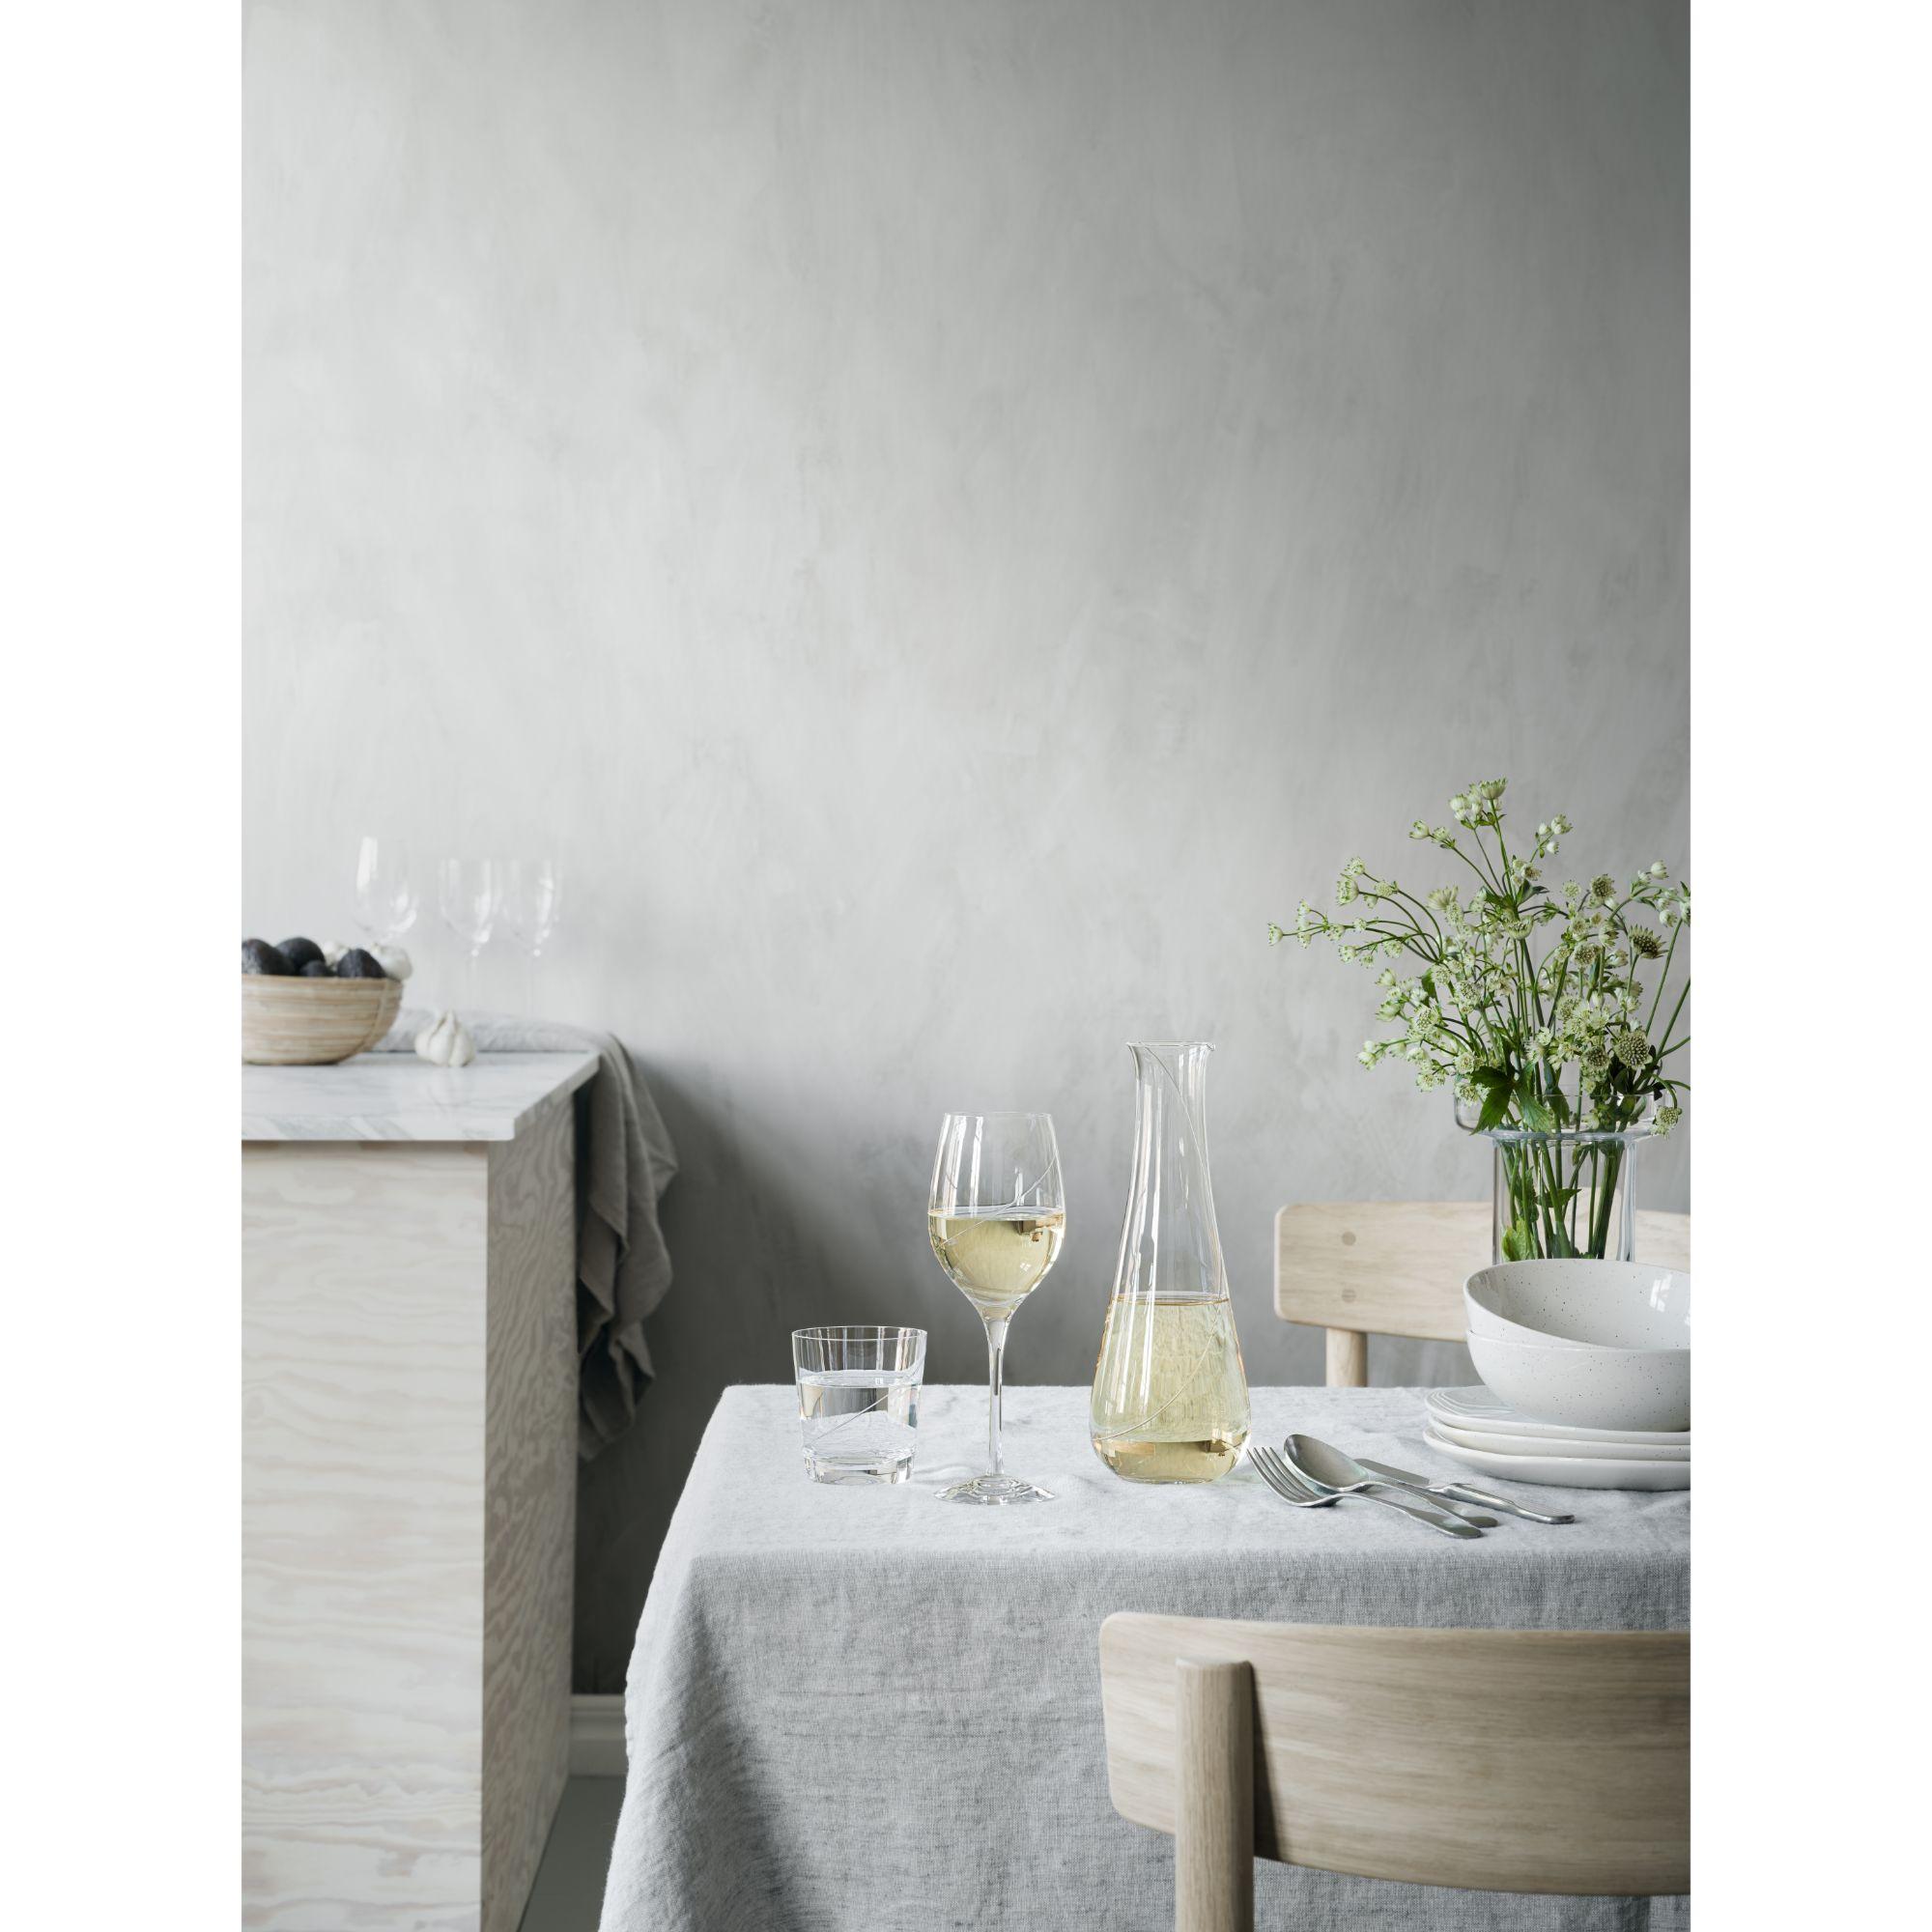 Line from Kosta Boda has been in production since 1982. The collection is unique, with a thread of spun glass applied on each product by hand – a symbol of high-quality Swedish craftsmanship from Kosta Glassworks. The mouth-blown wine glass is ideal